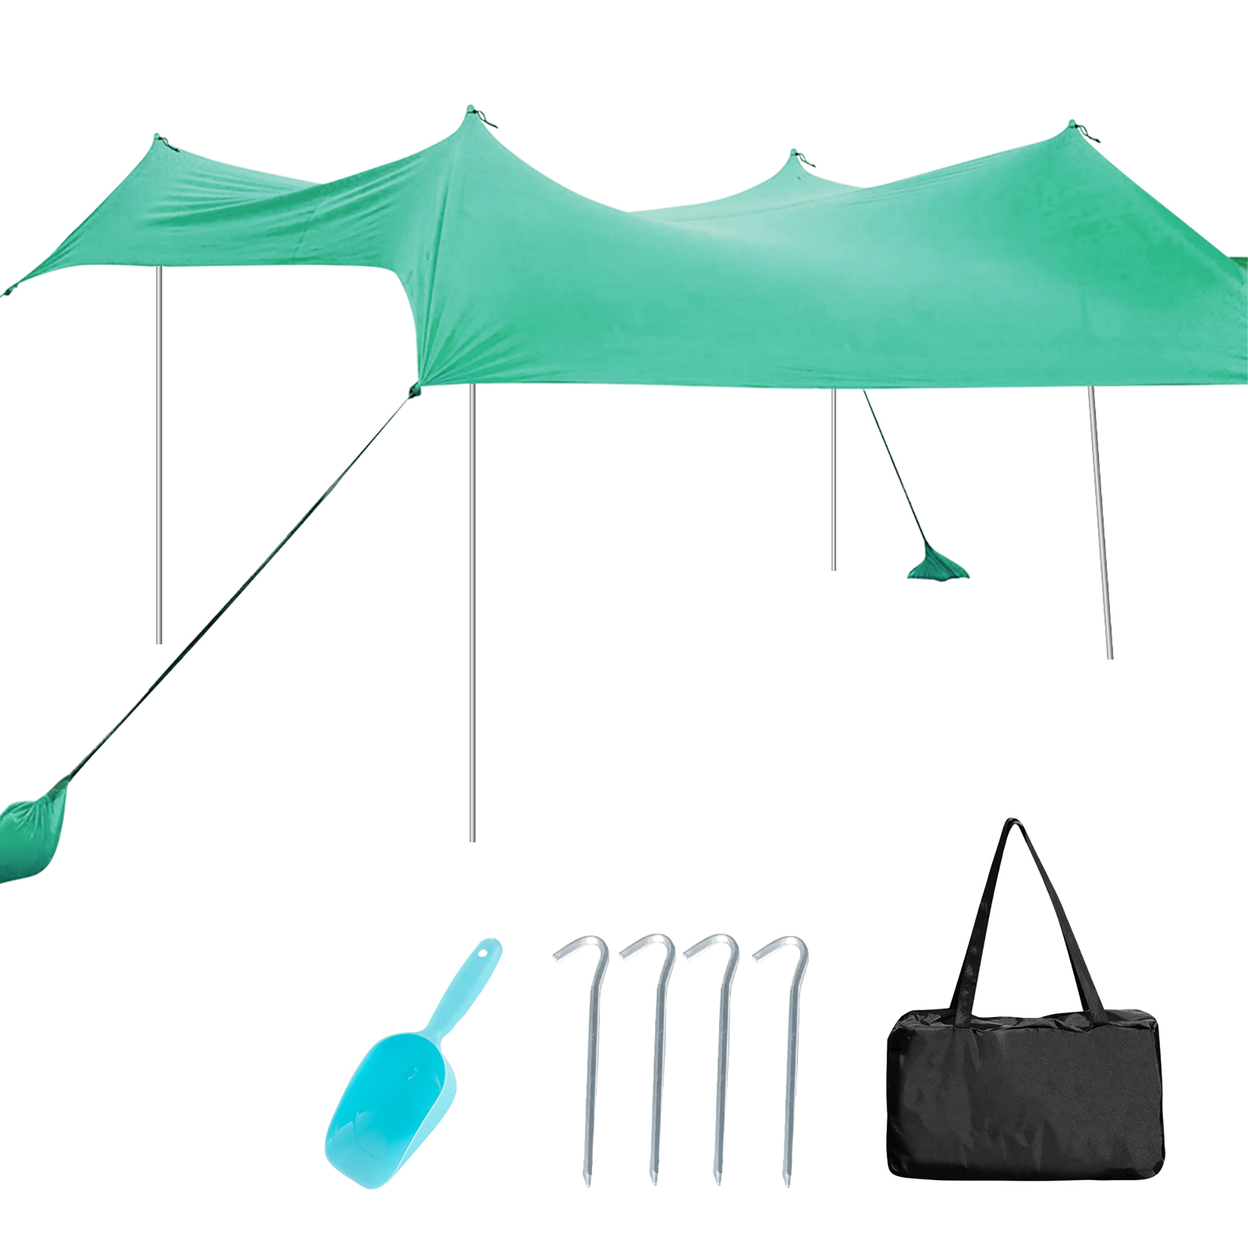 10x9 FT Portable Beach Canopy Tent Shelter W/ Sand Anchor Carry Bag - Green